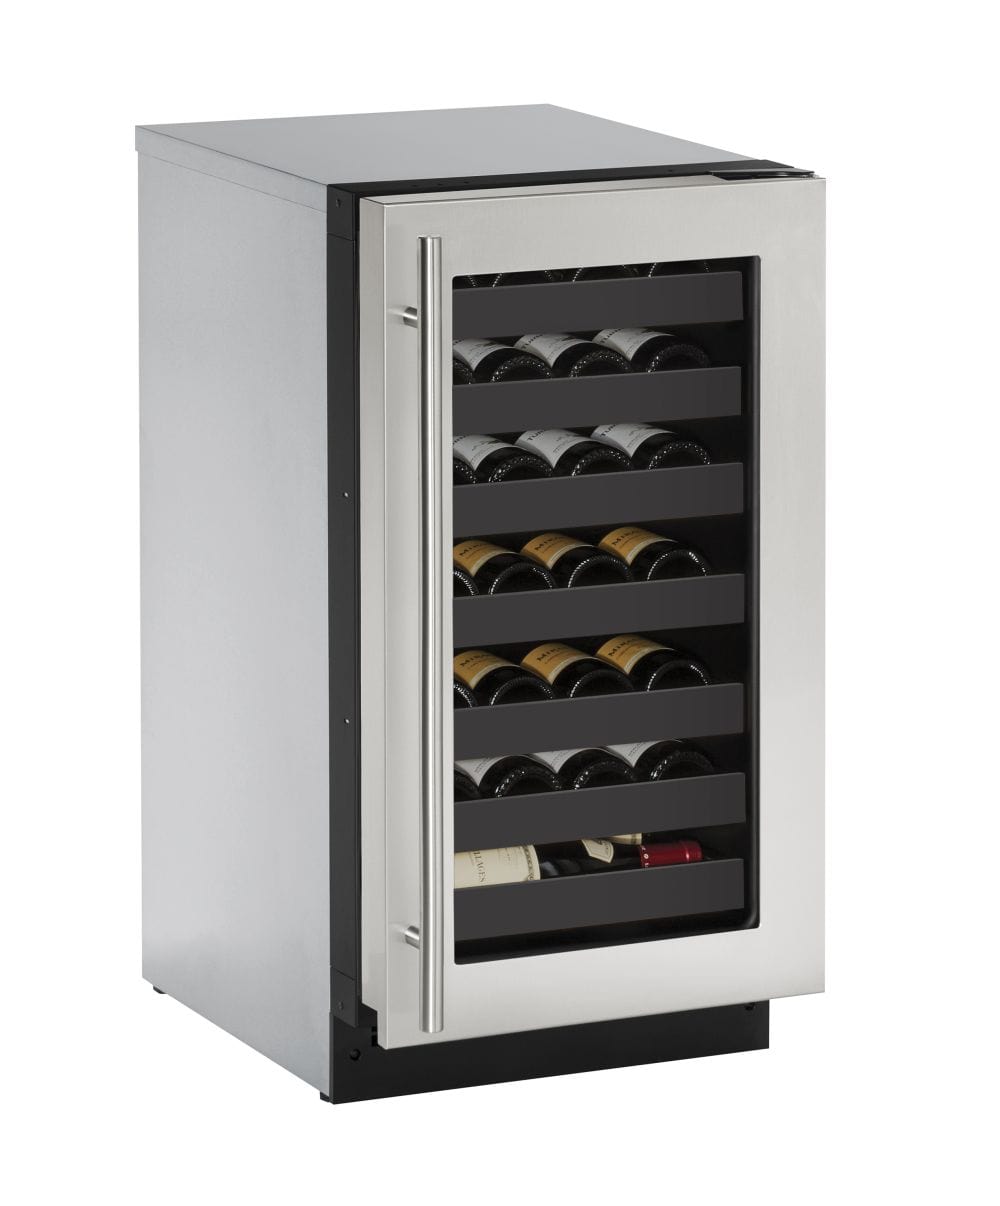 U-Line 2218WC 18" Wine Refrigerator Reversible Hinge Integrated/Stainless Frame Wine Coolers U-2218WCS-00B Luxury Appliances Direct